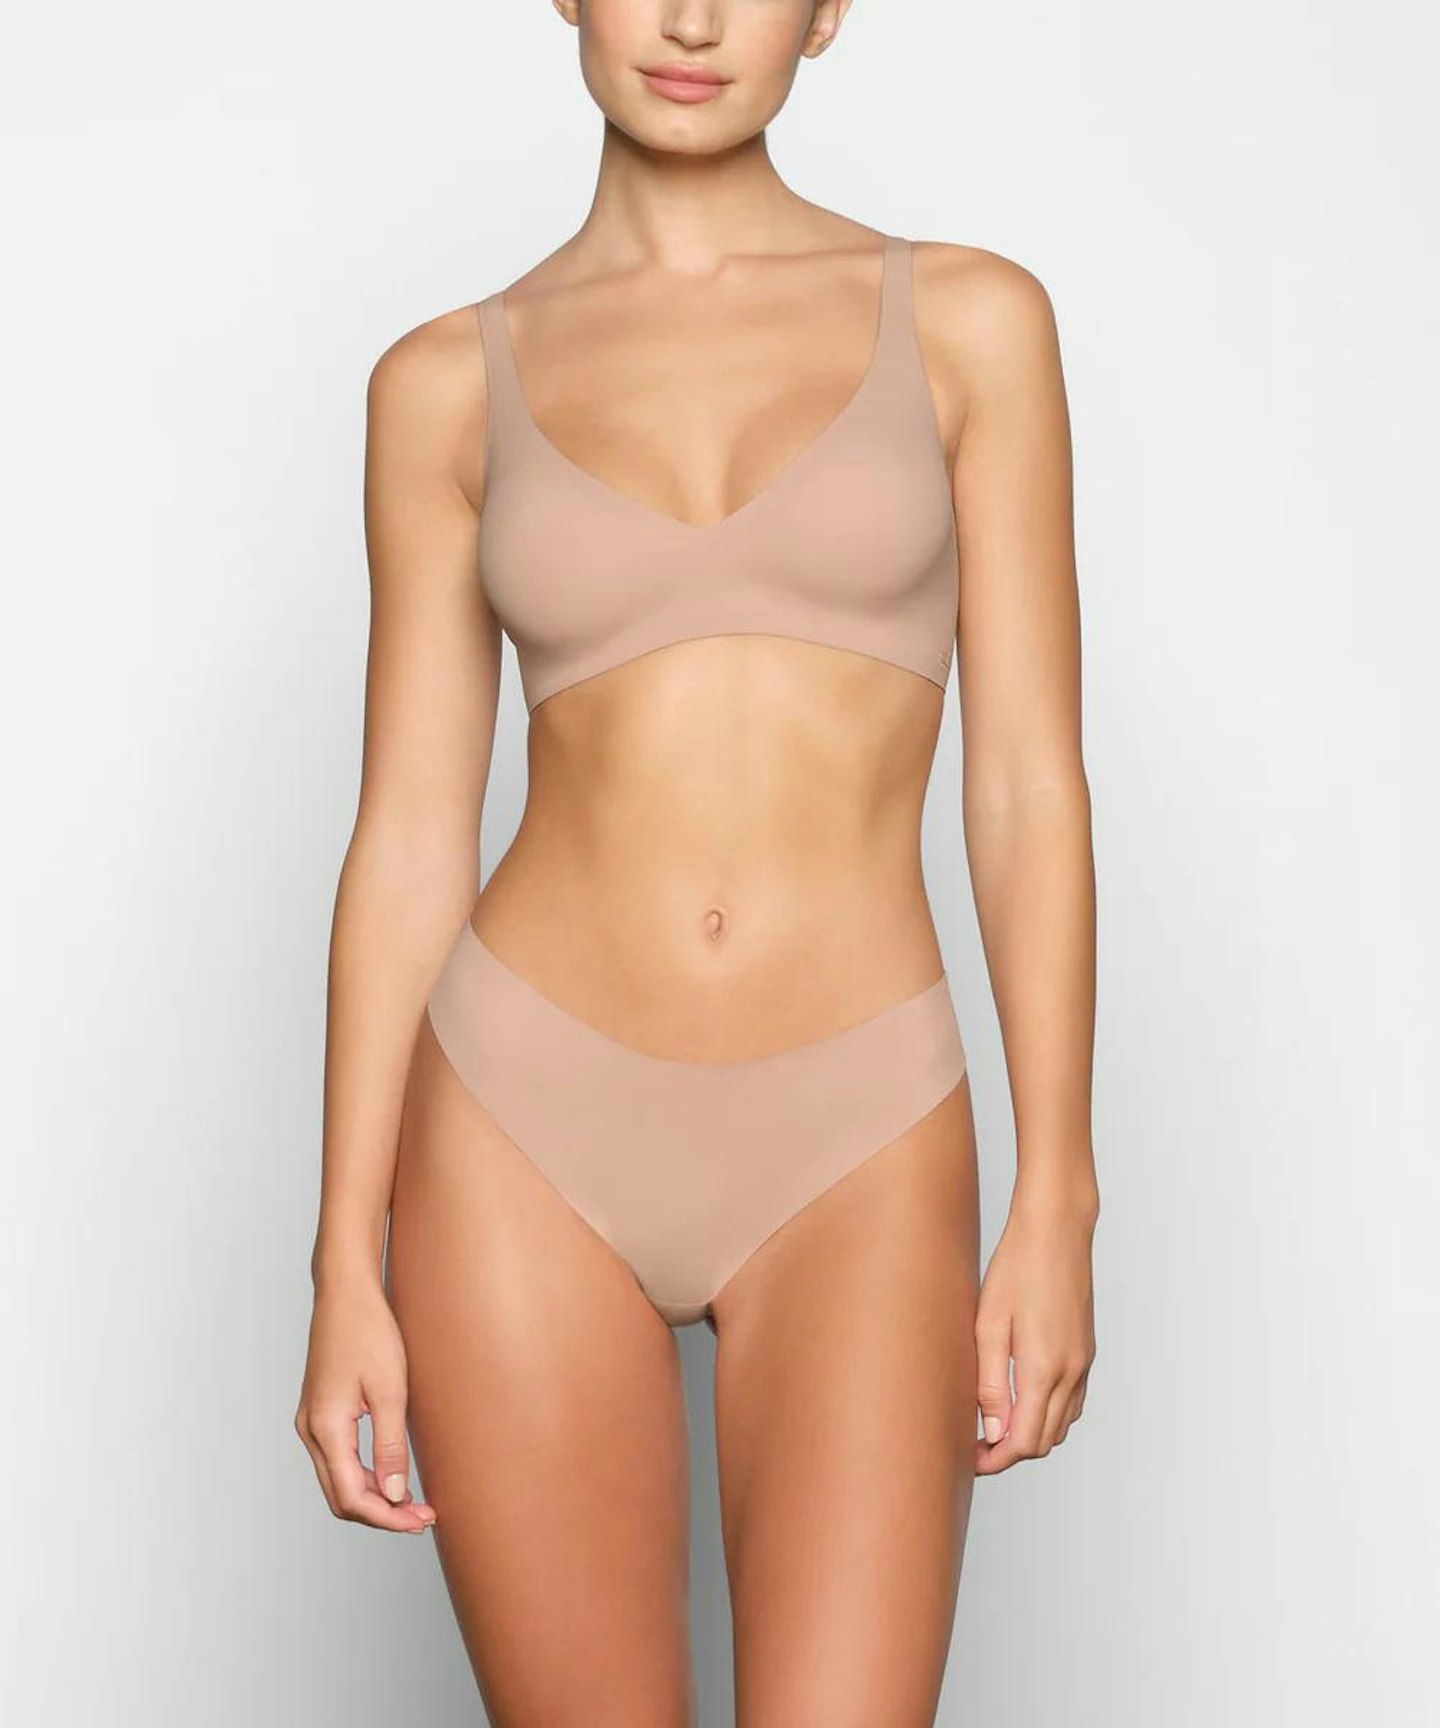 SKIMS Fits Everybody Unlined Demi Bra Size undefined - $30